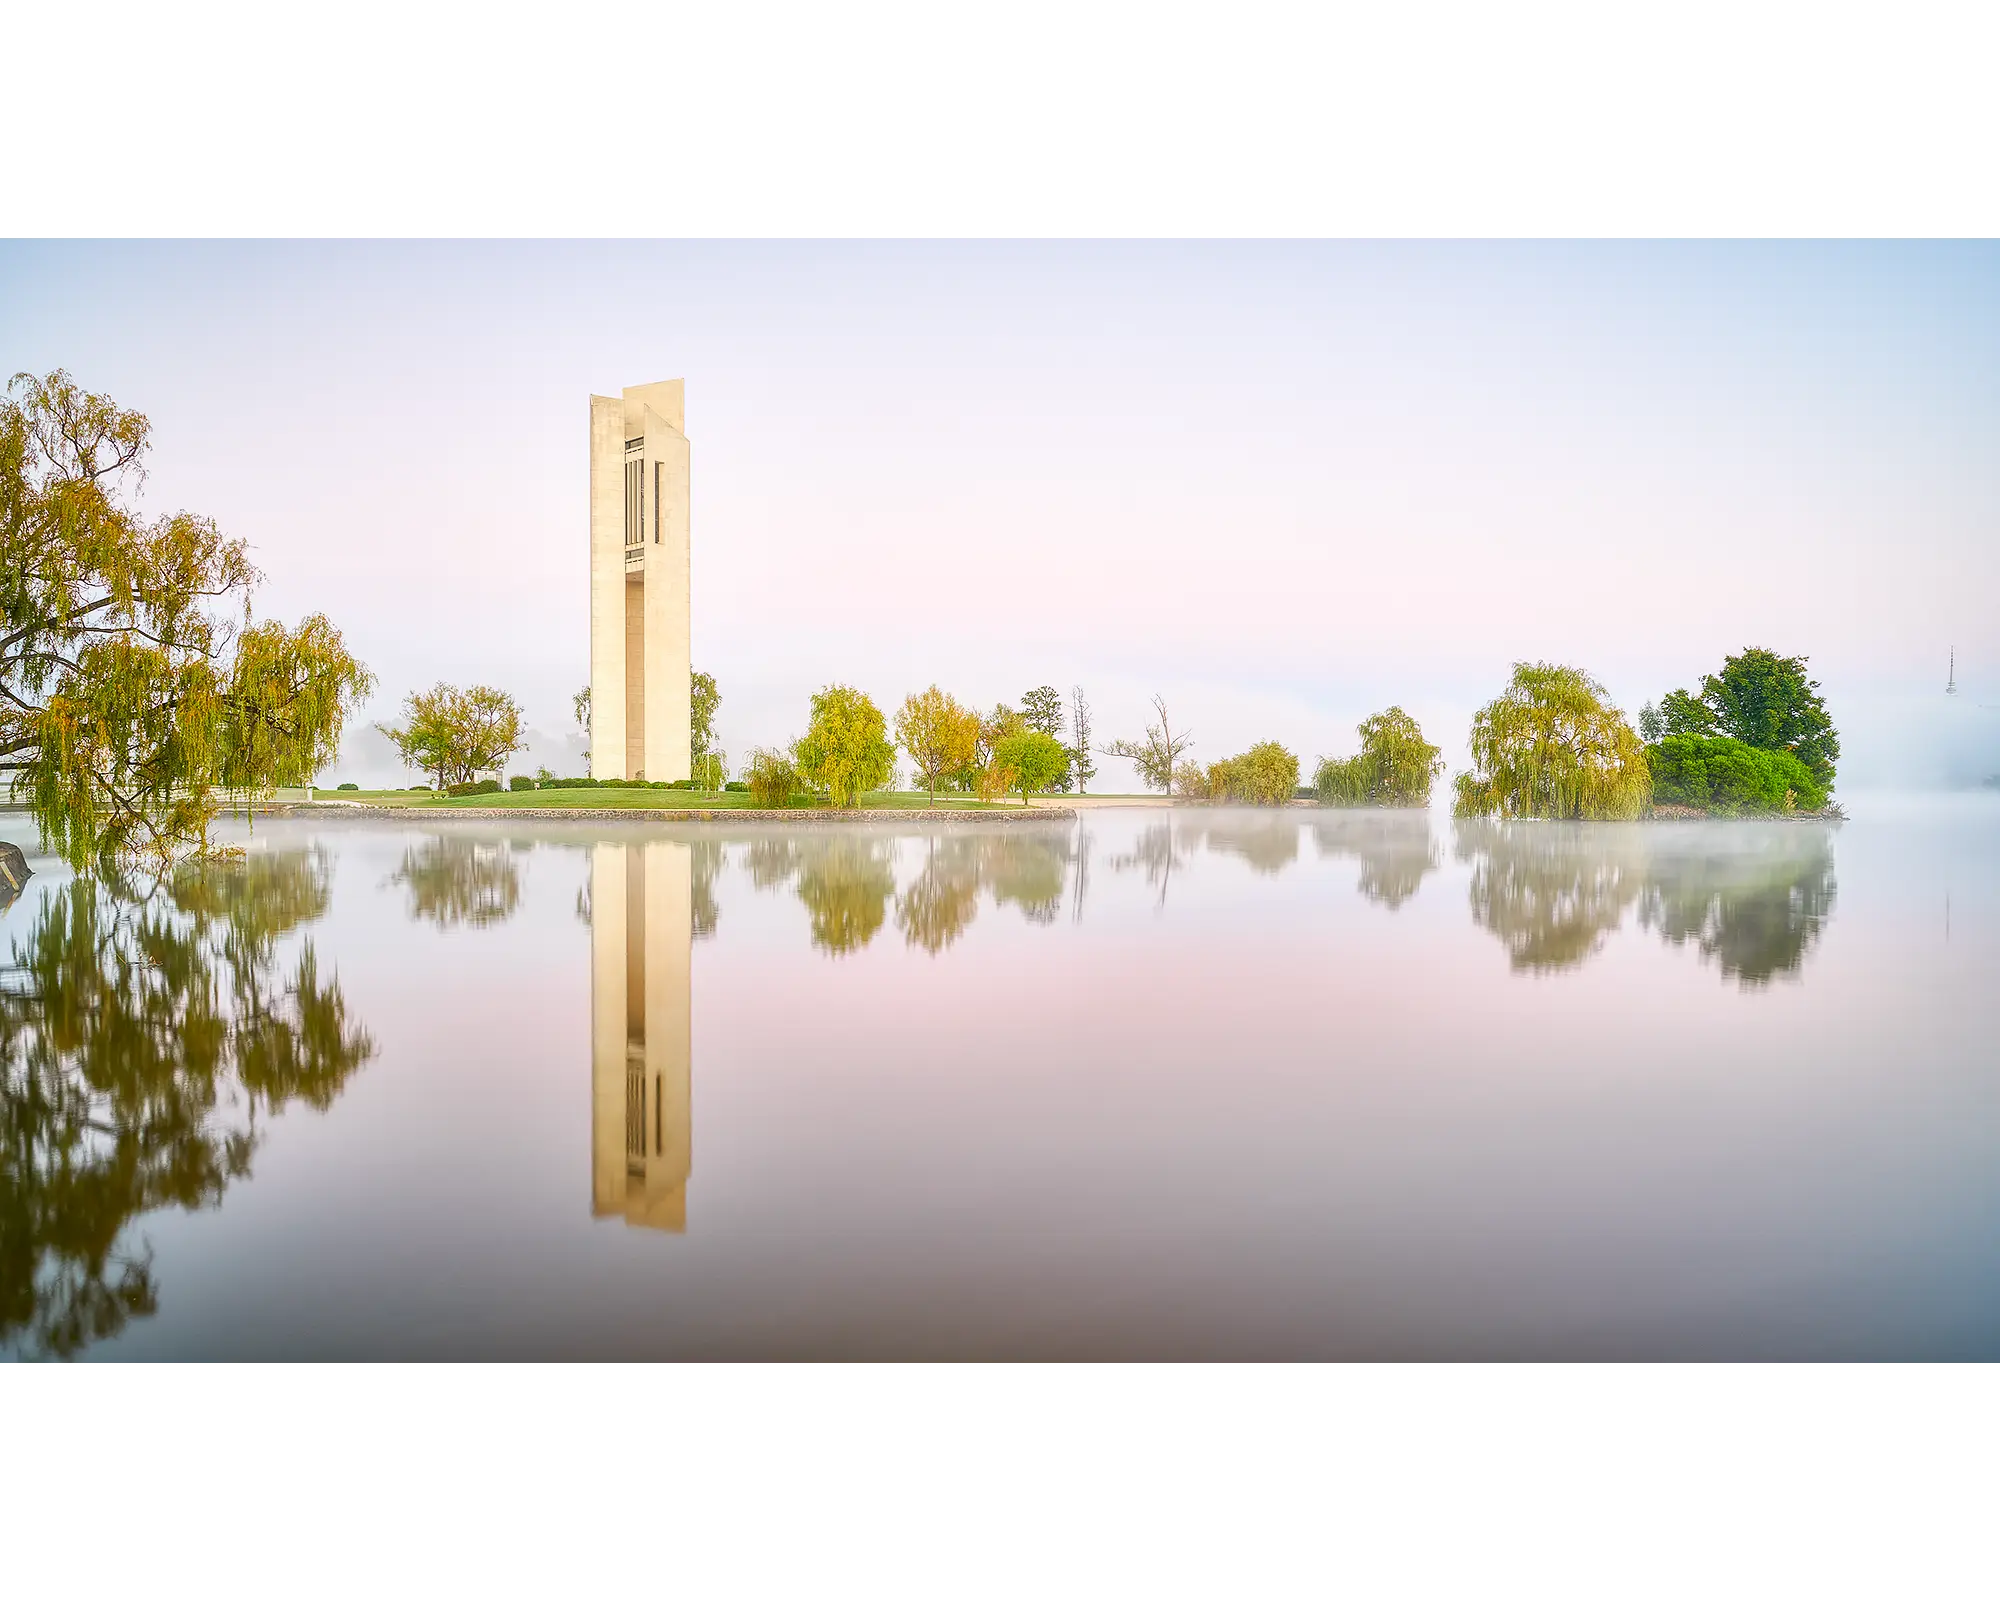 Reflective - Carillon with fog and reflections in Lake Burley Griffin, Canberra.